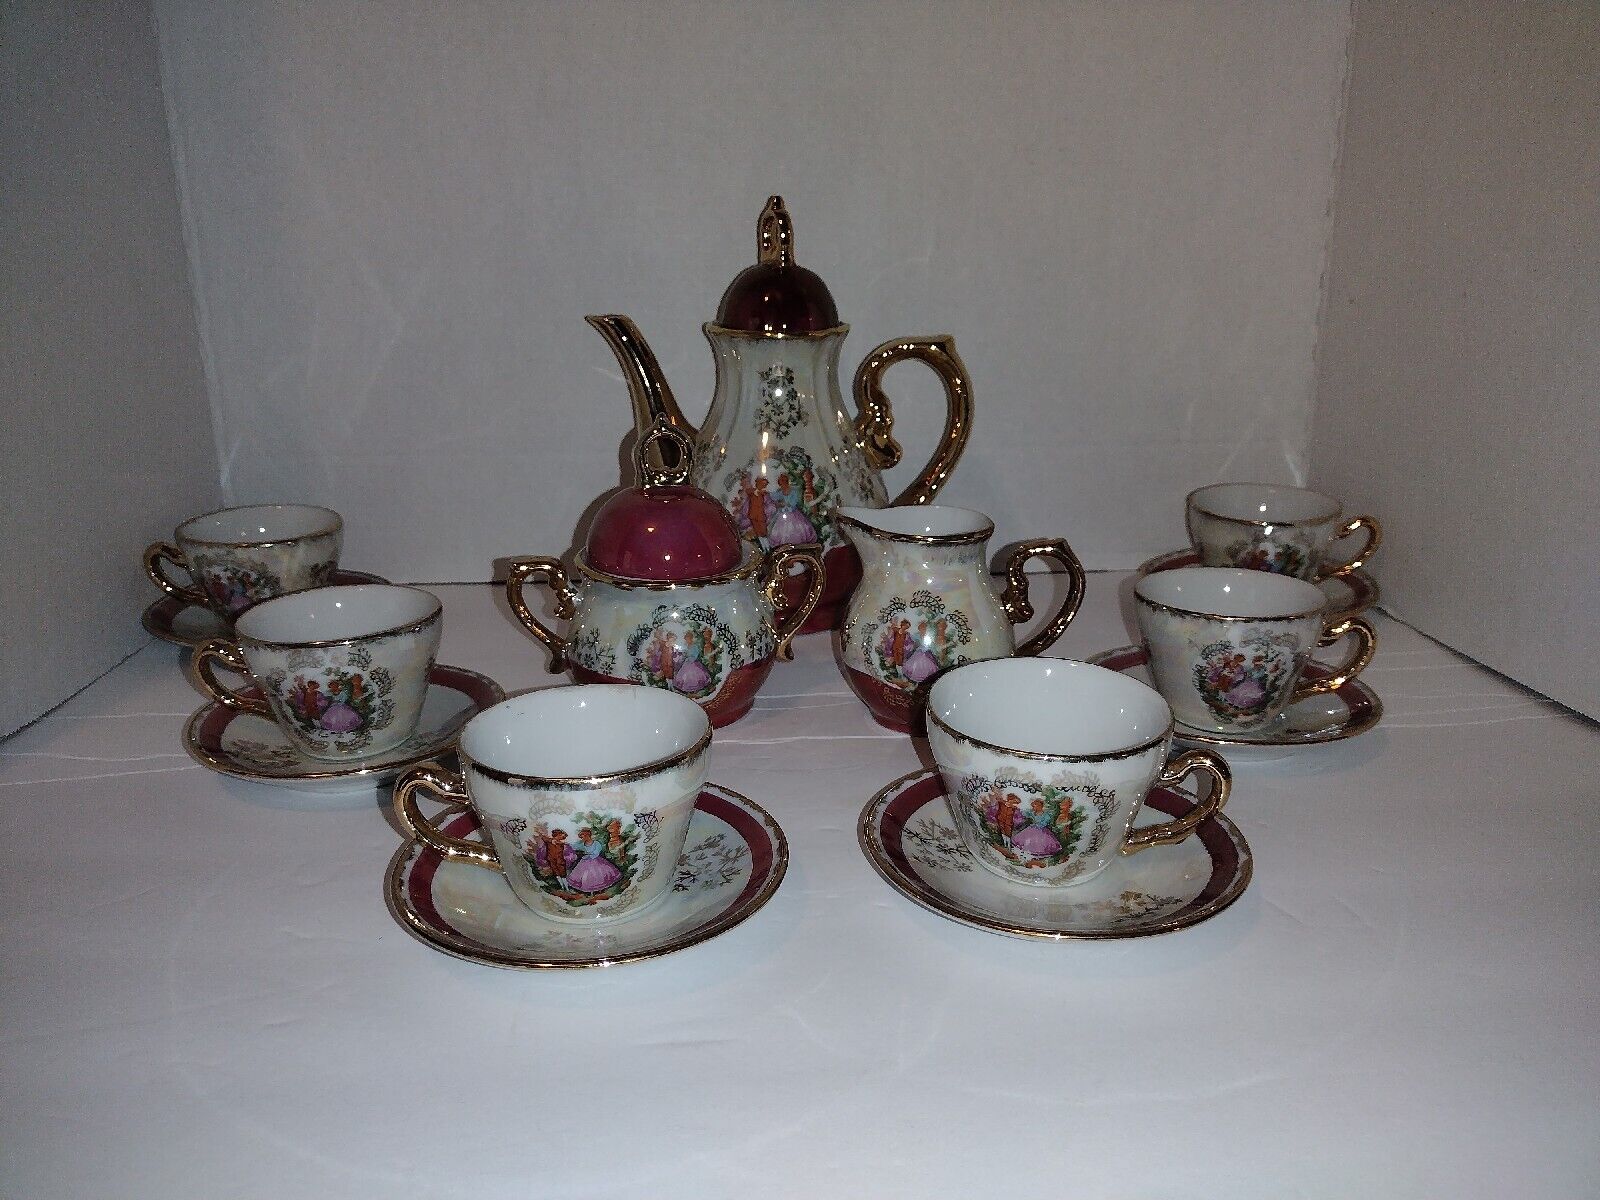 17PC Set Yusui 24KT.G.P.Featuring Courting Old Fashion Romance Tea Set For 6